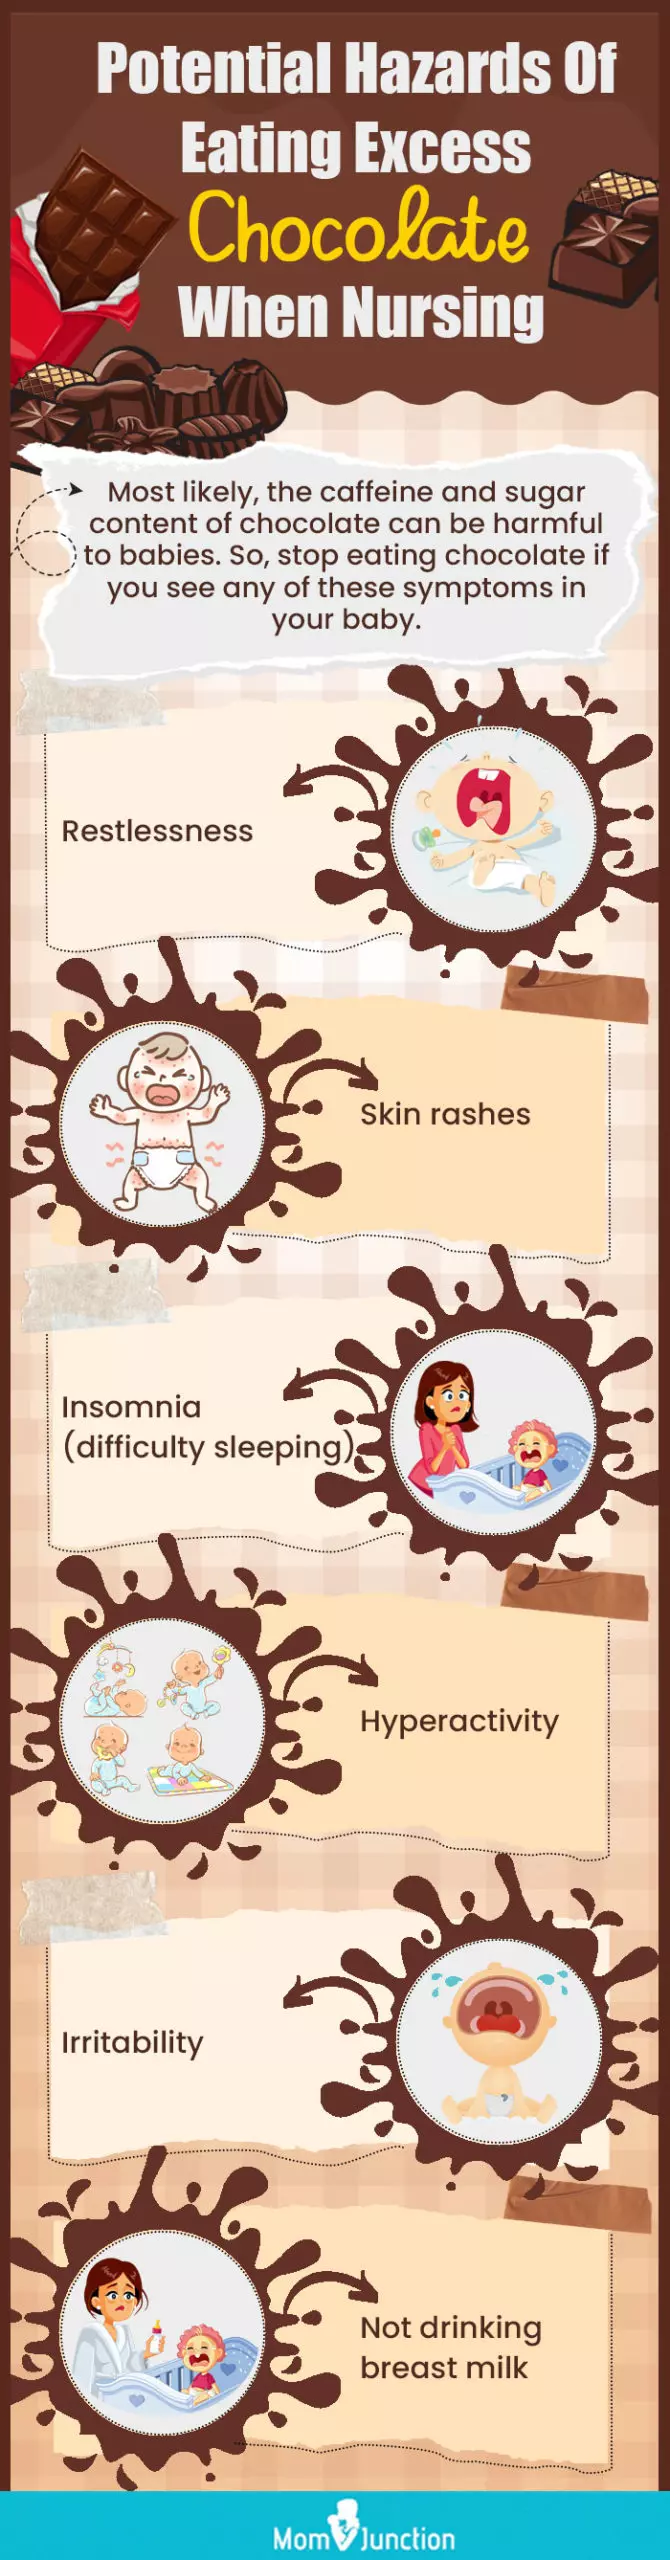 potential hazards of eating excess chocolate when nursing (infographic)